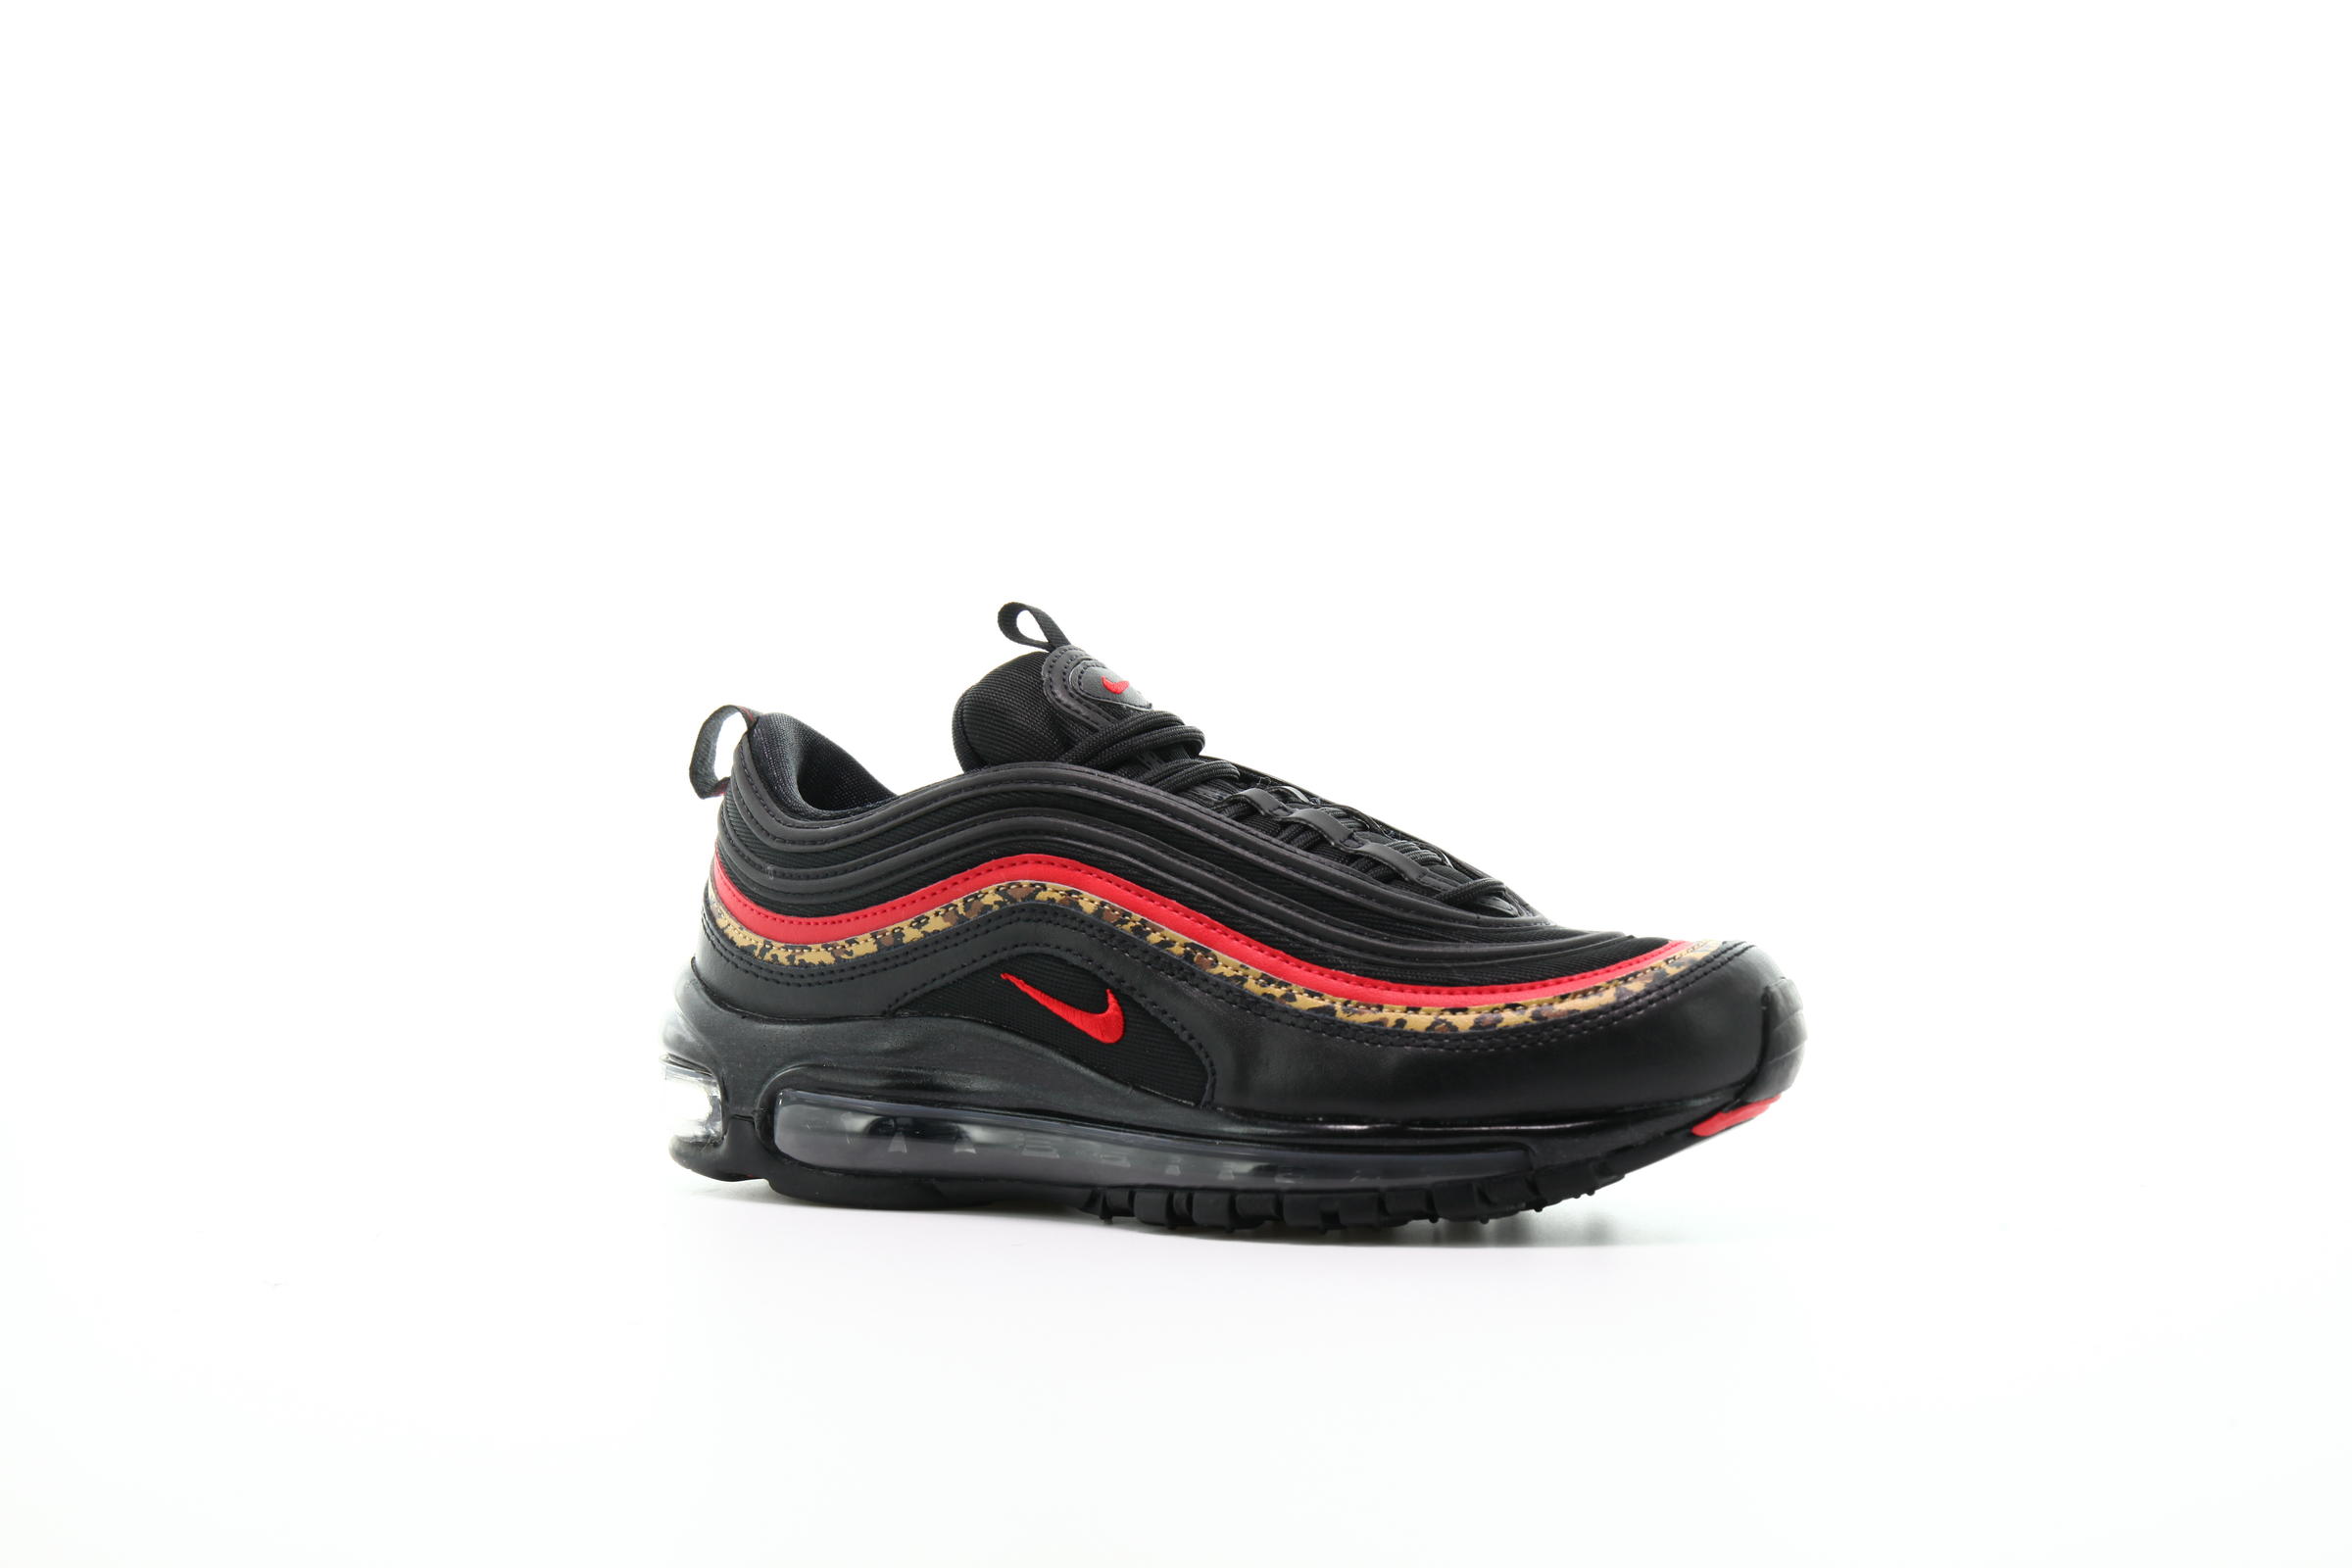 Nike Wmns Air Max 97 "University Red"